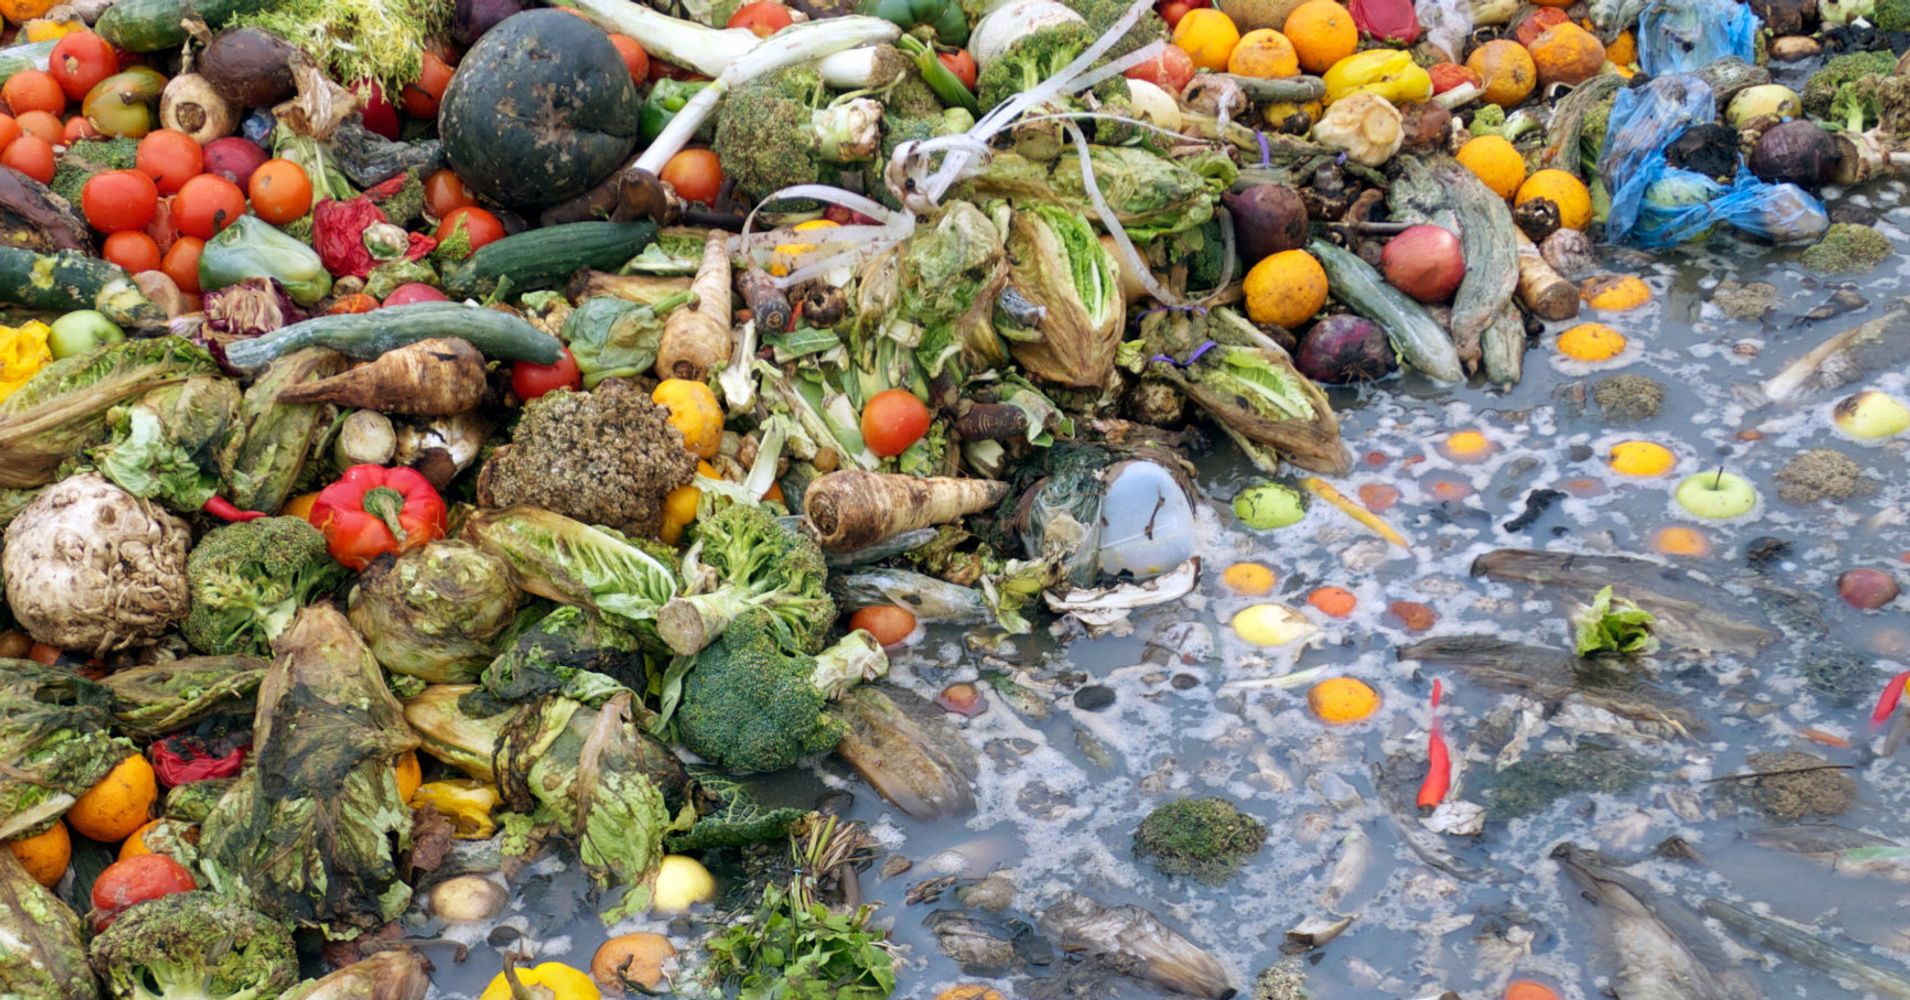 Our Ridiculously Massive Food Waste Is Driving Climate Change HuffPost